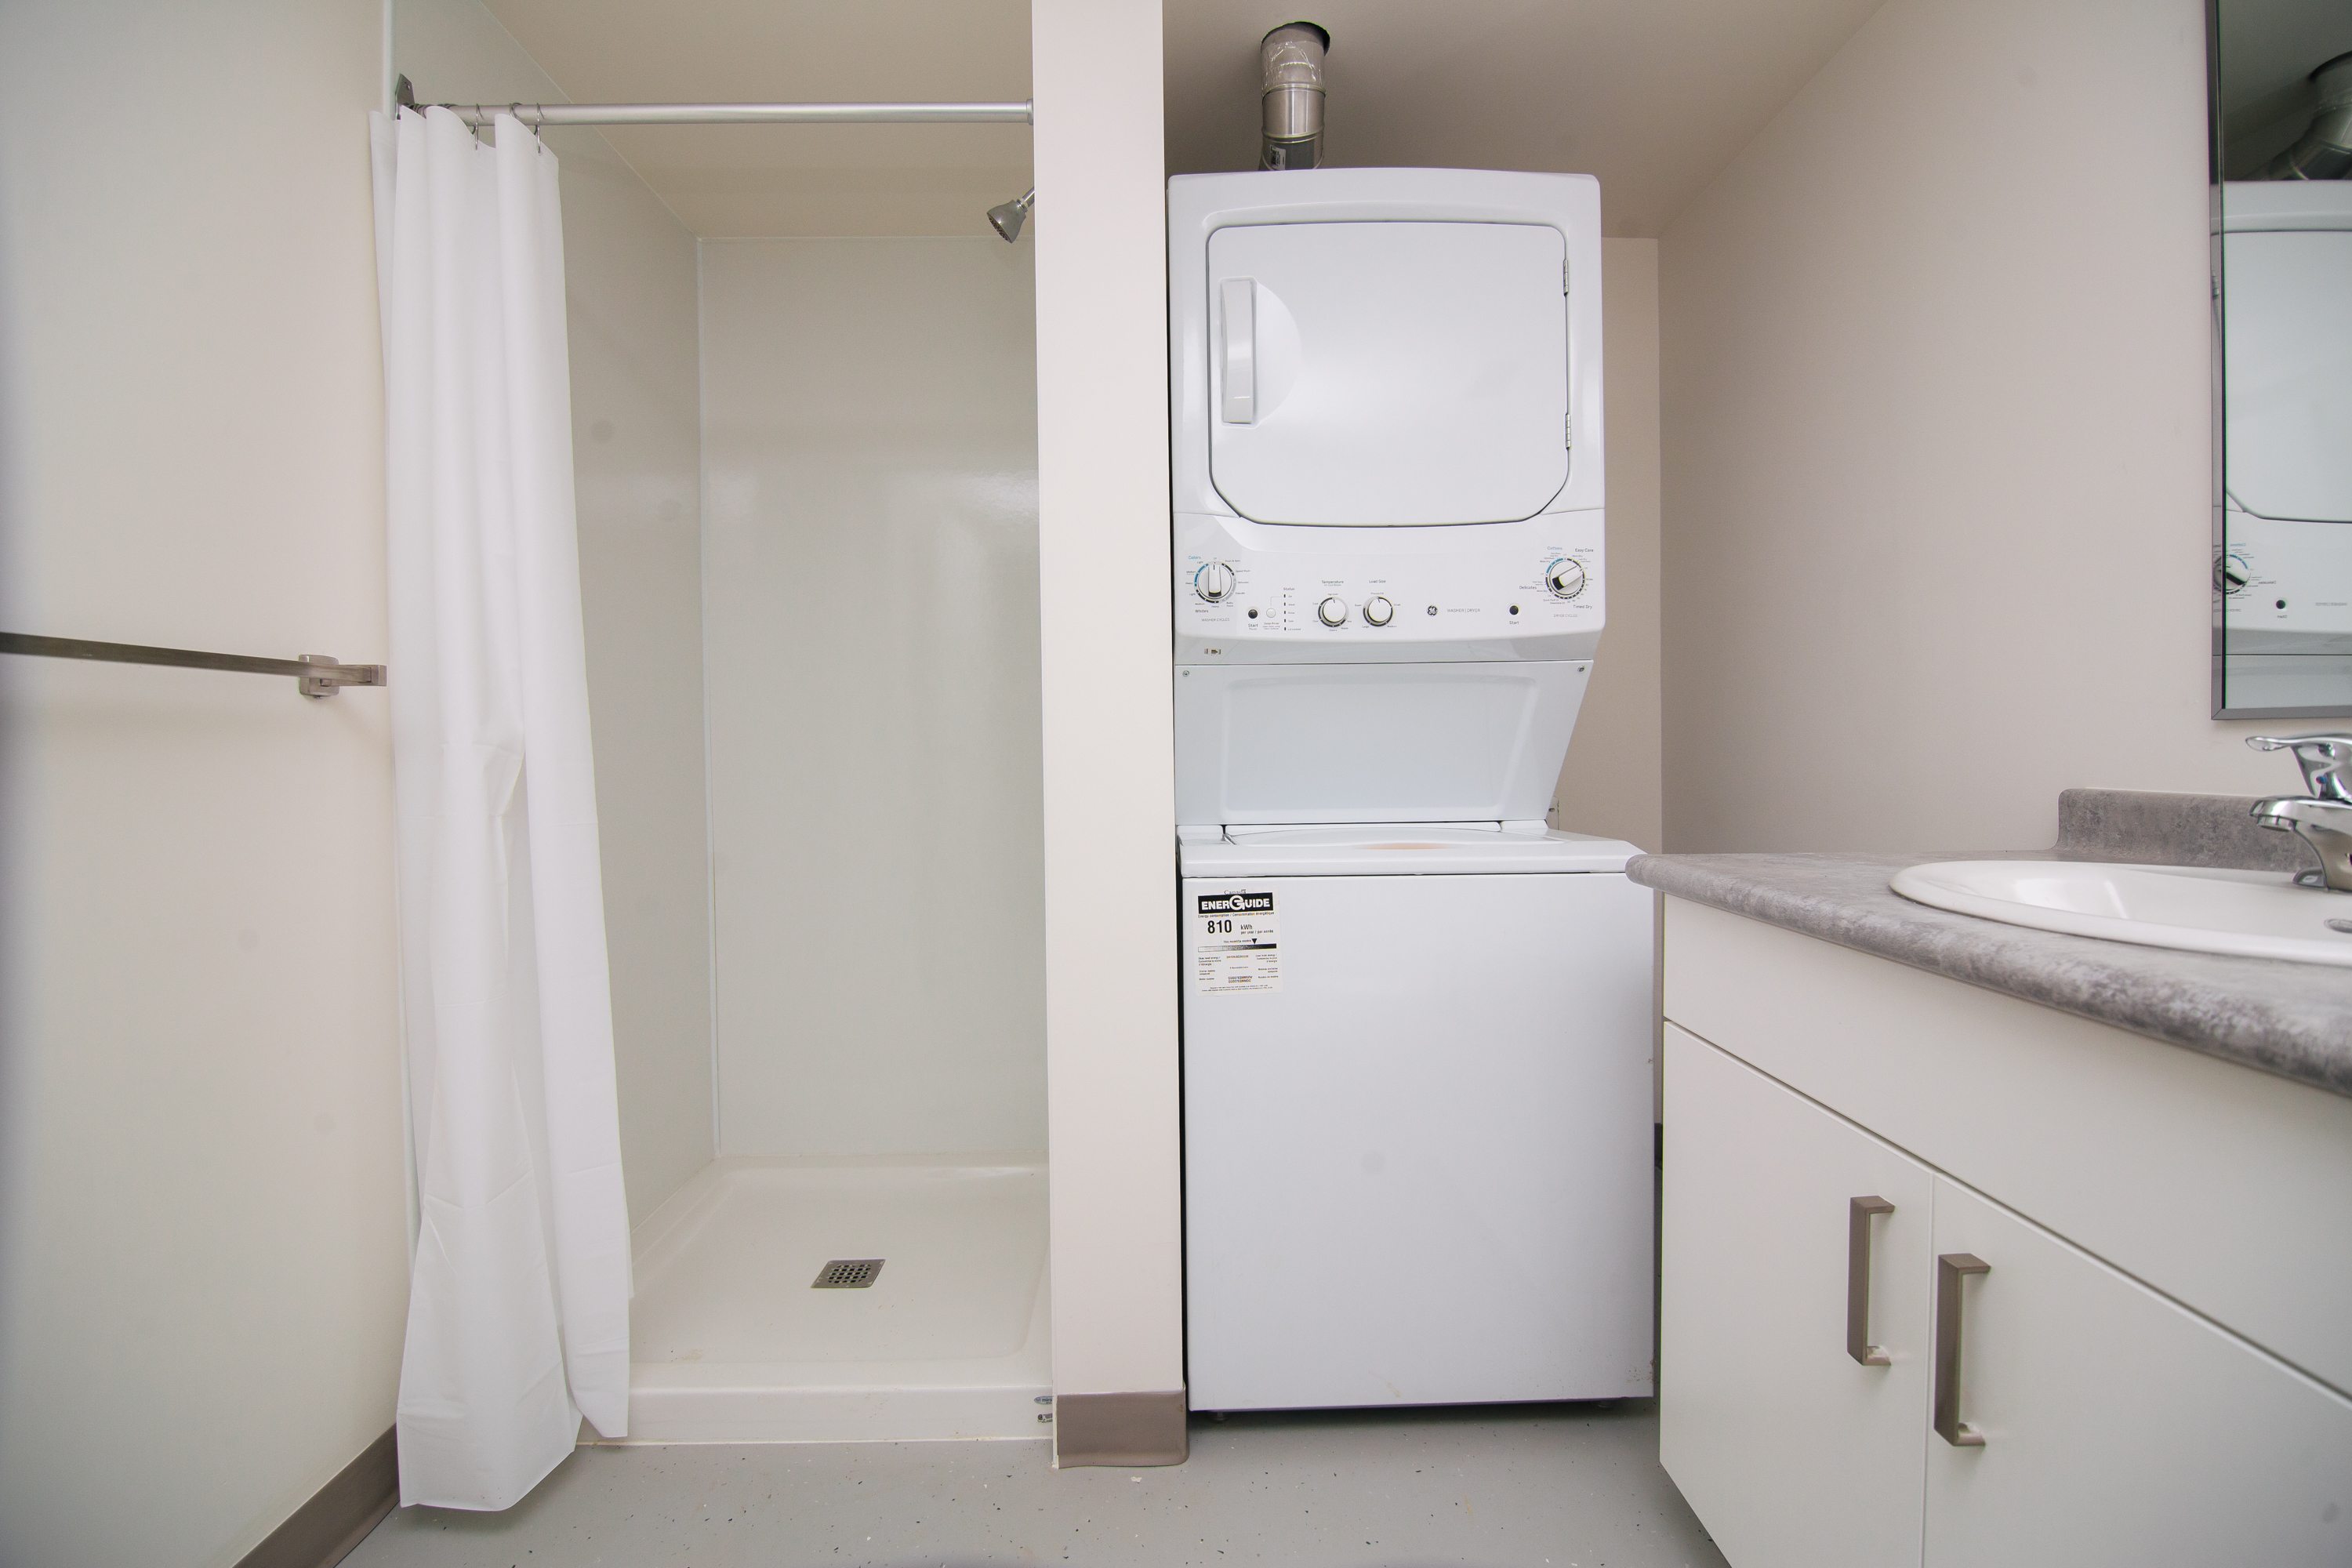 Washroom and laundry machine (washer/dryer) in micro-home unit